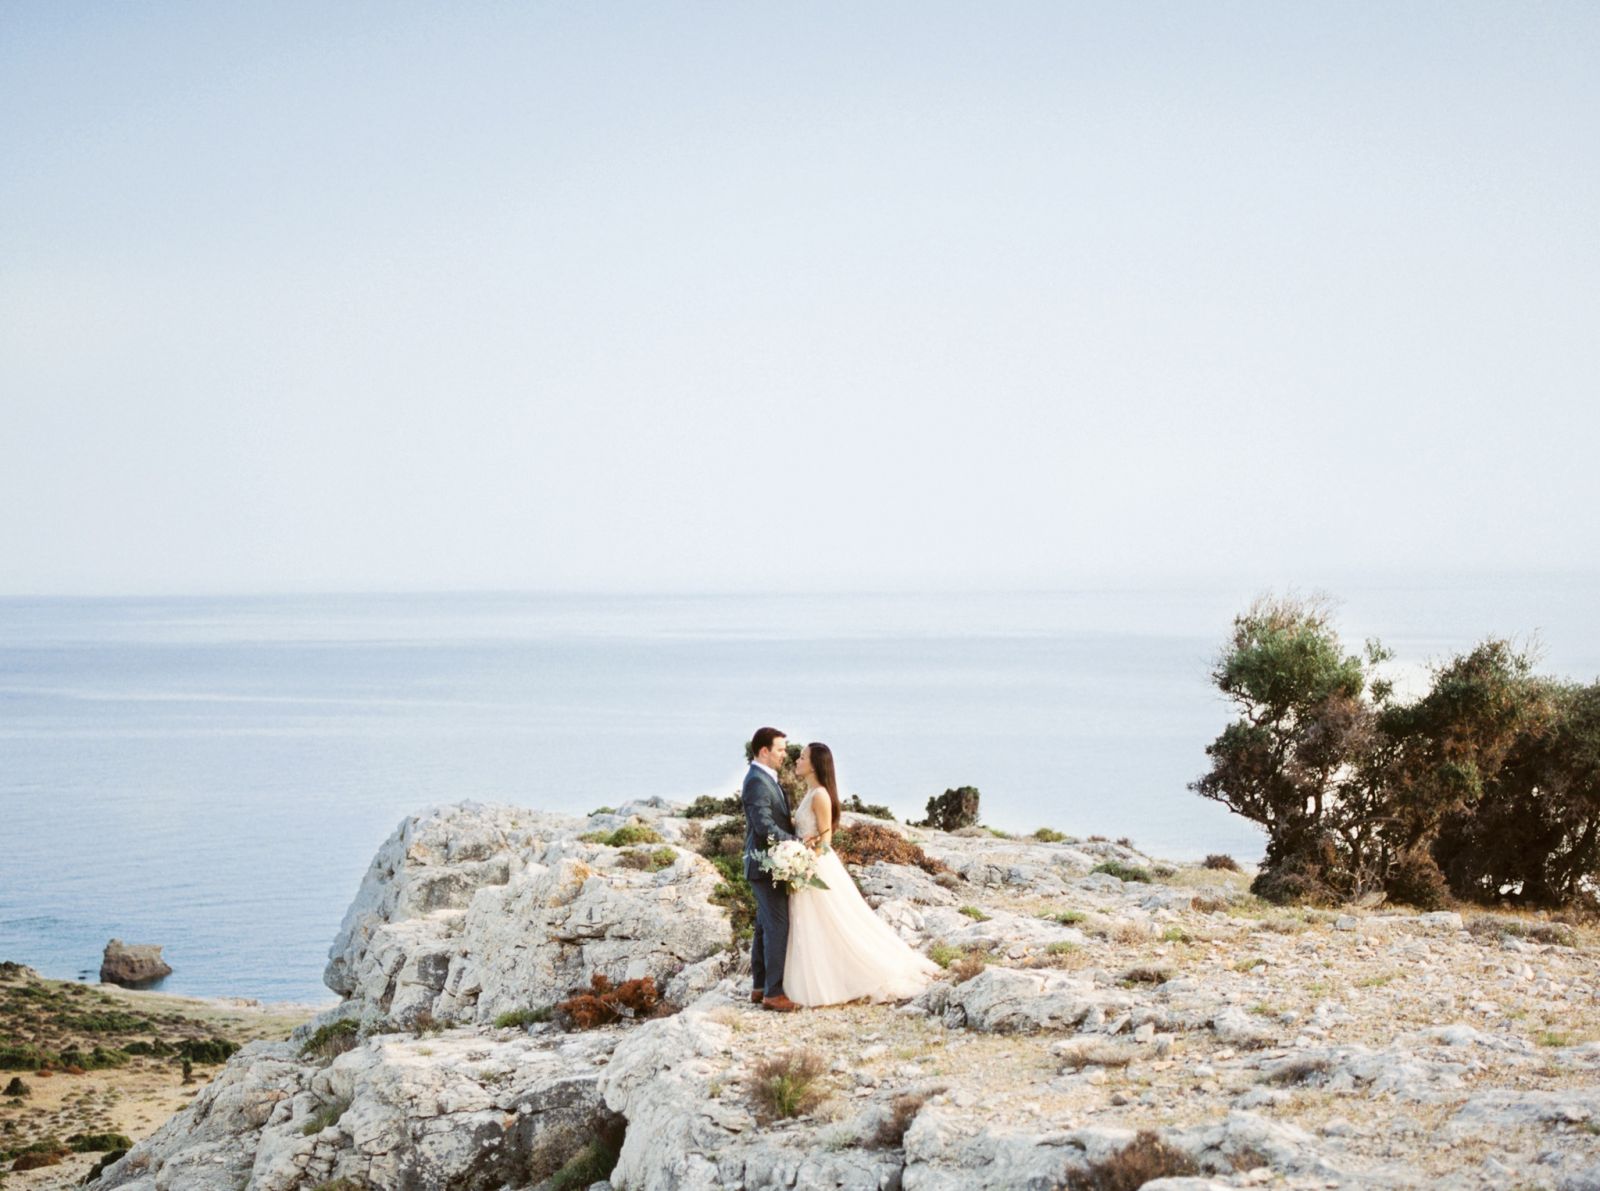 Day after wedding shoot on the Aegean Sea at sunset | Greece Real Wedding